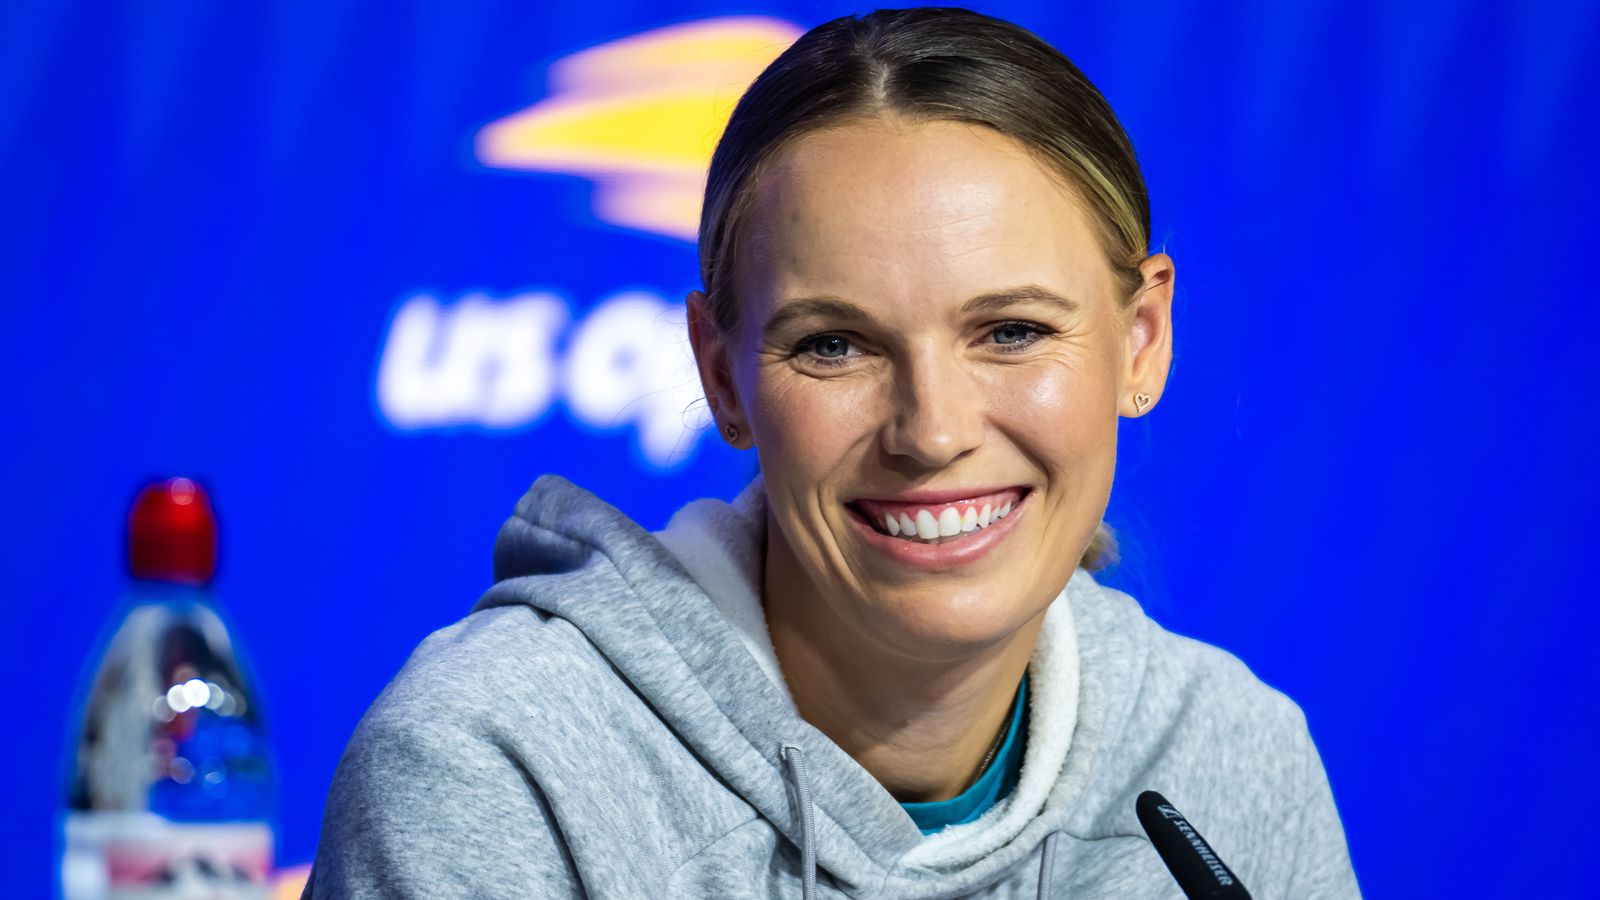 Us Open Caroline Wozniacki Is Proud To Have Paved The Way For Future Generations Of Tennis